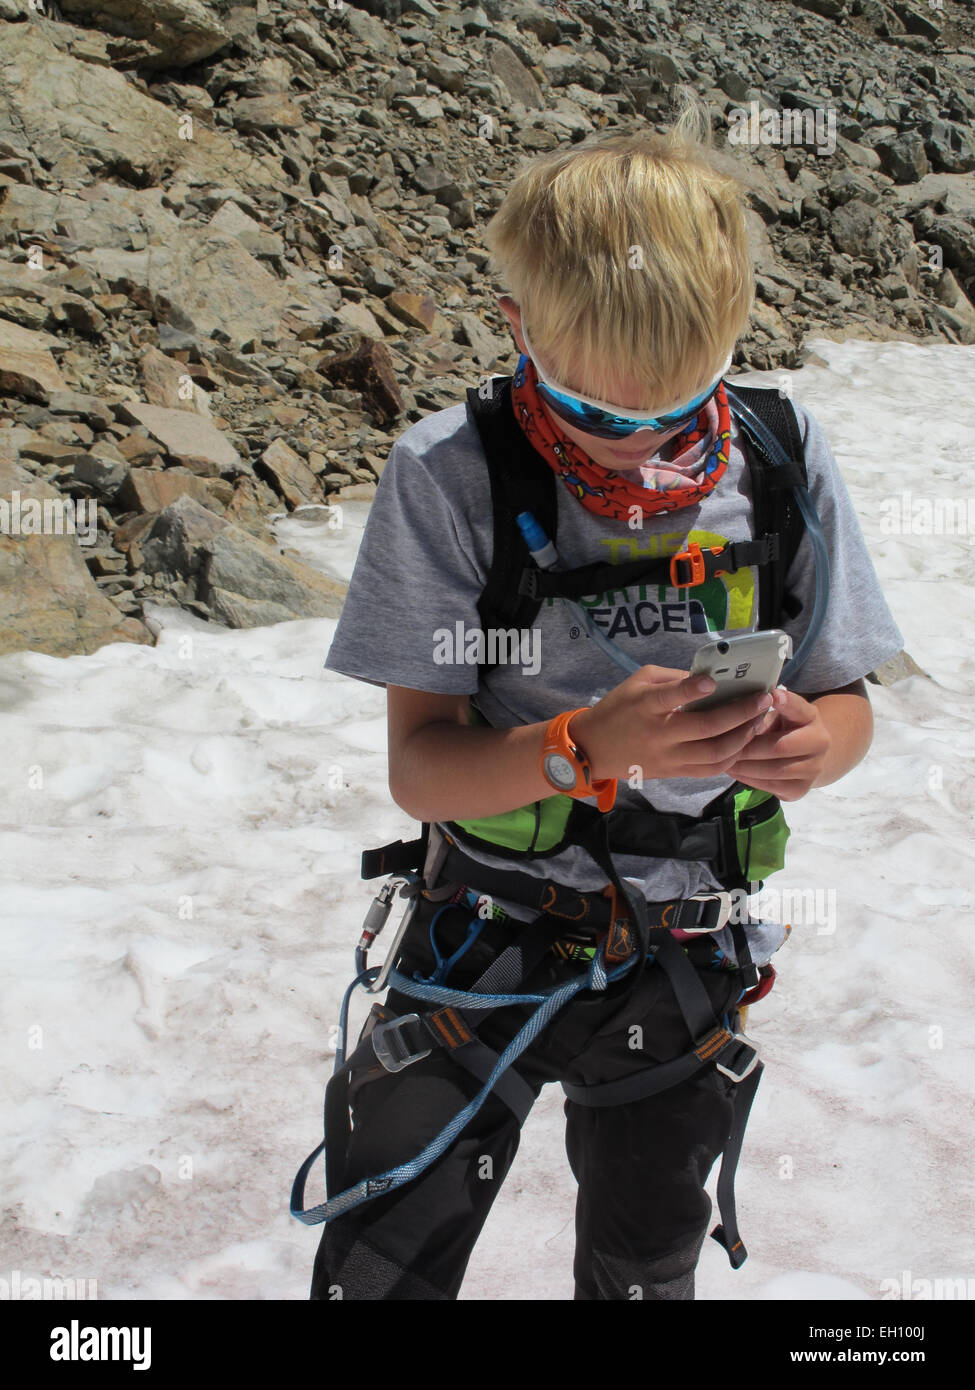 Mobile technology being used by a young boy on a climbing and mountaineering expedition Stock Photo